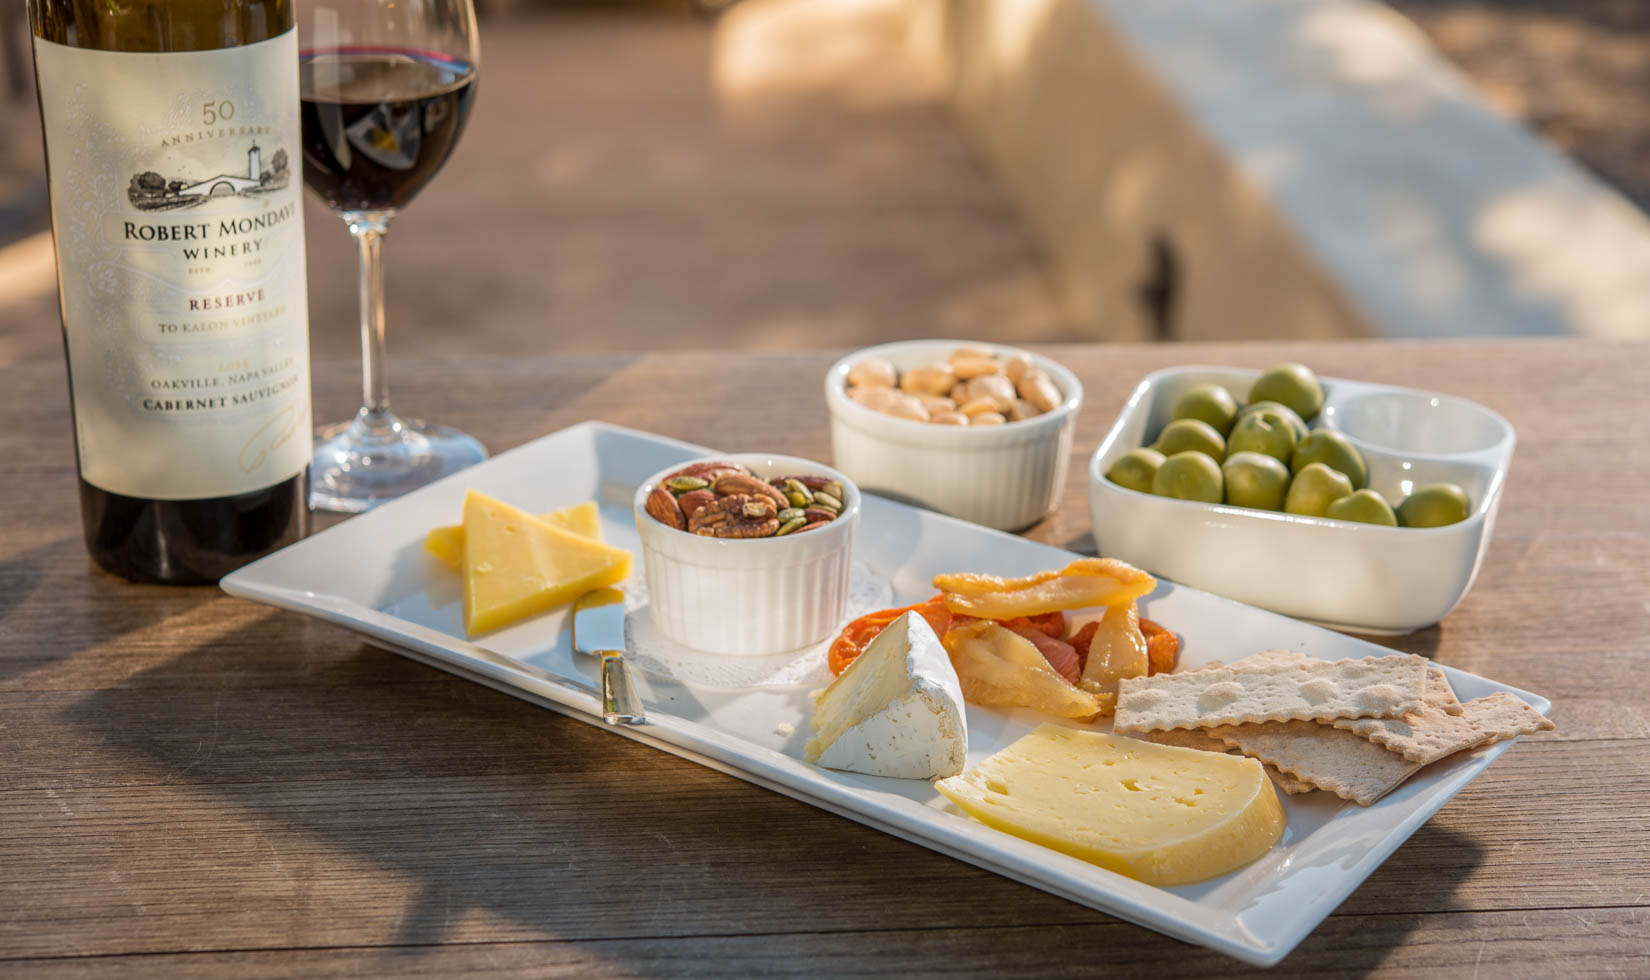 wine and cheese in the table with nuts and grapes